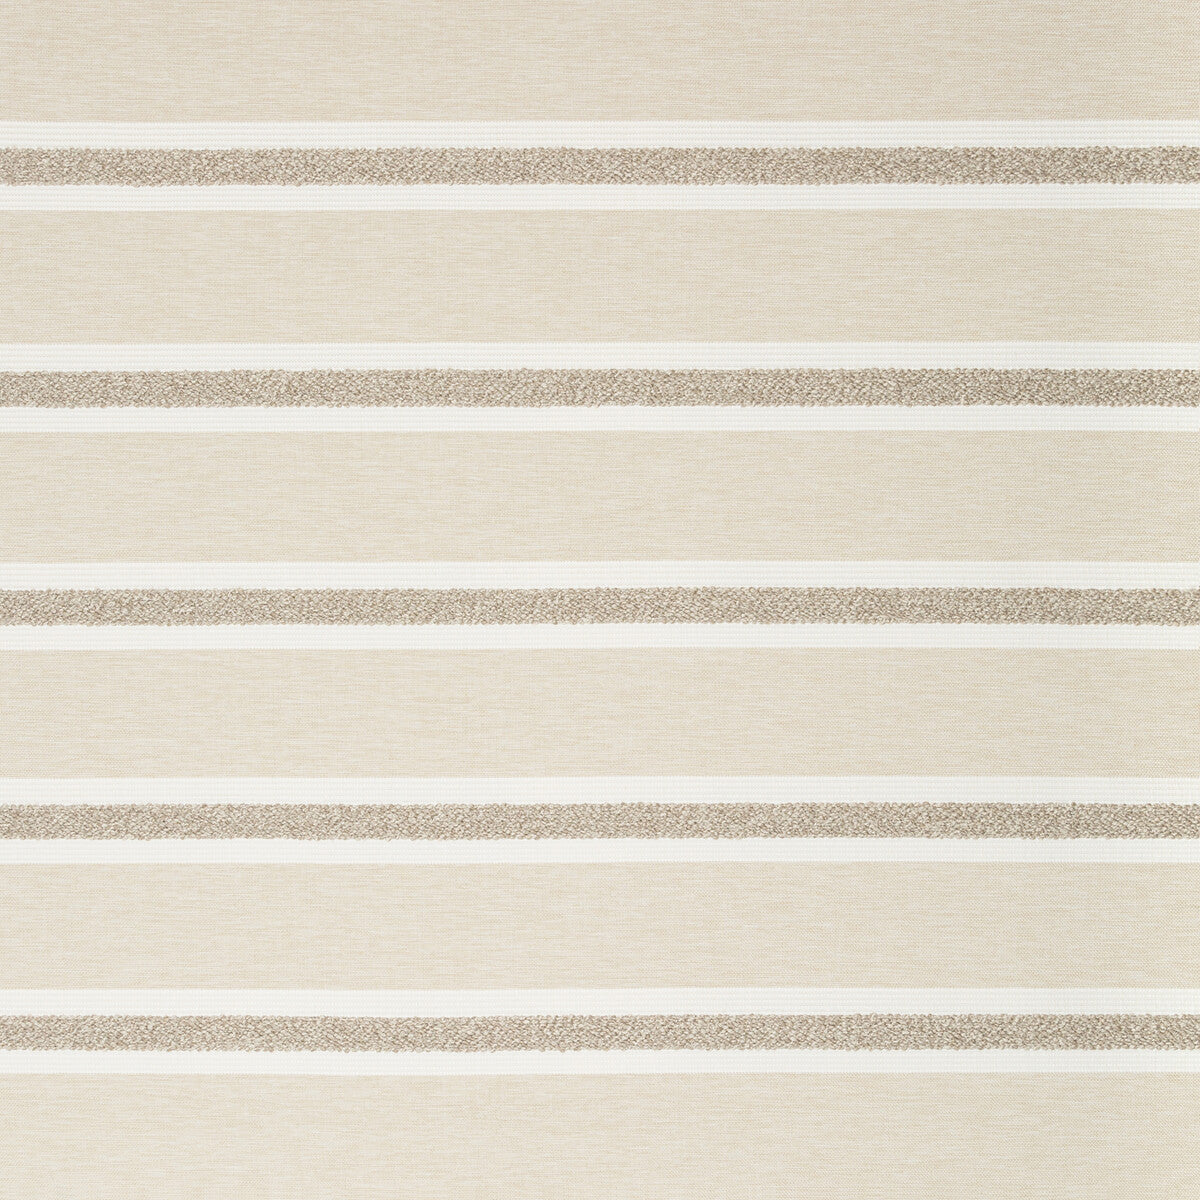 Know The Ropes fabric in natural color - pattern 35539.16.0 - by Kravet Couture in the Vista collection